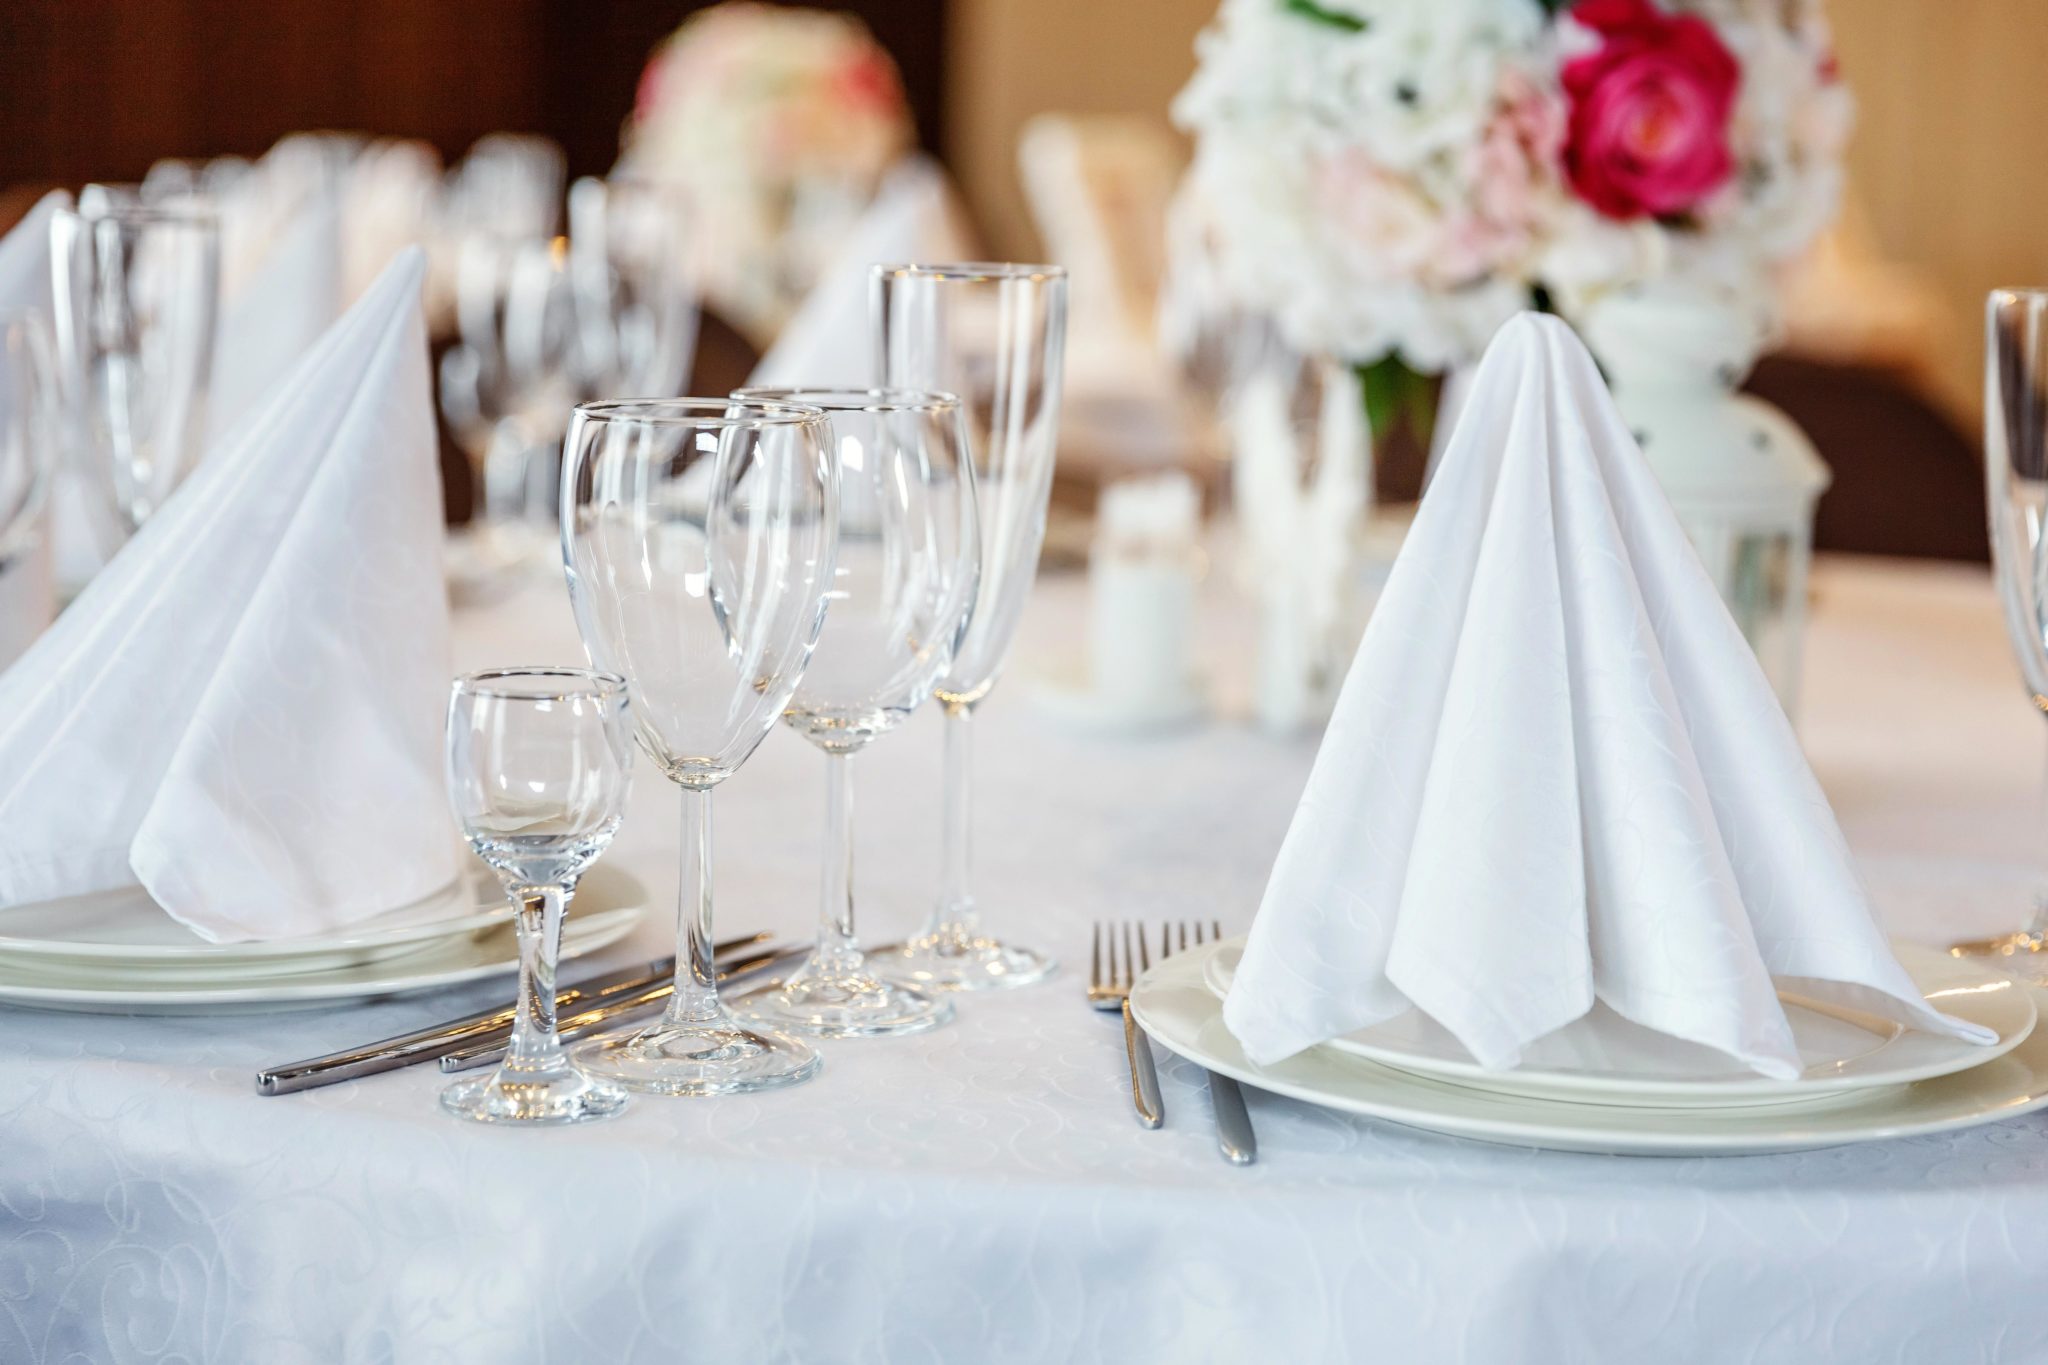 Venues for Kosher Events